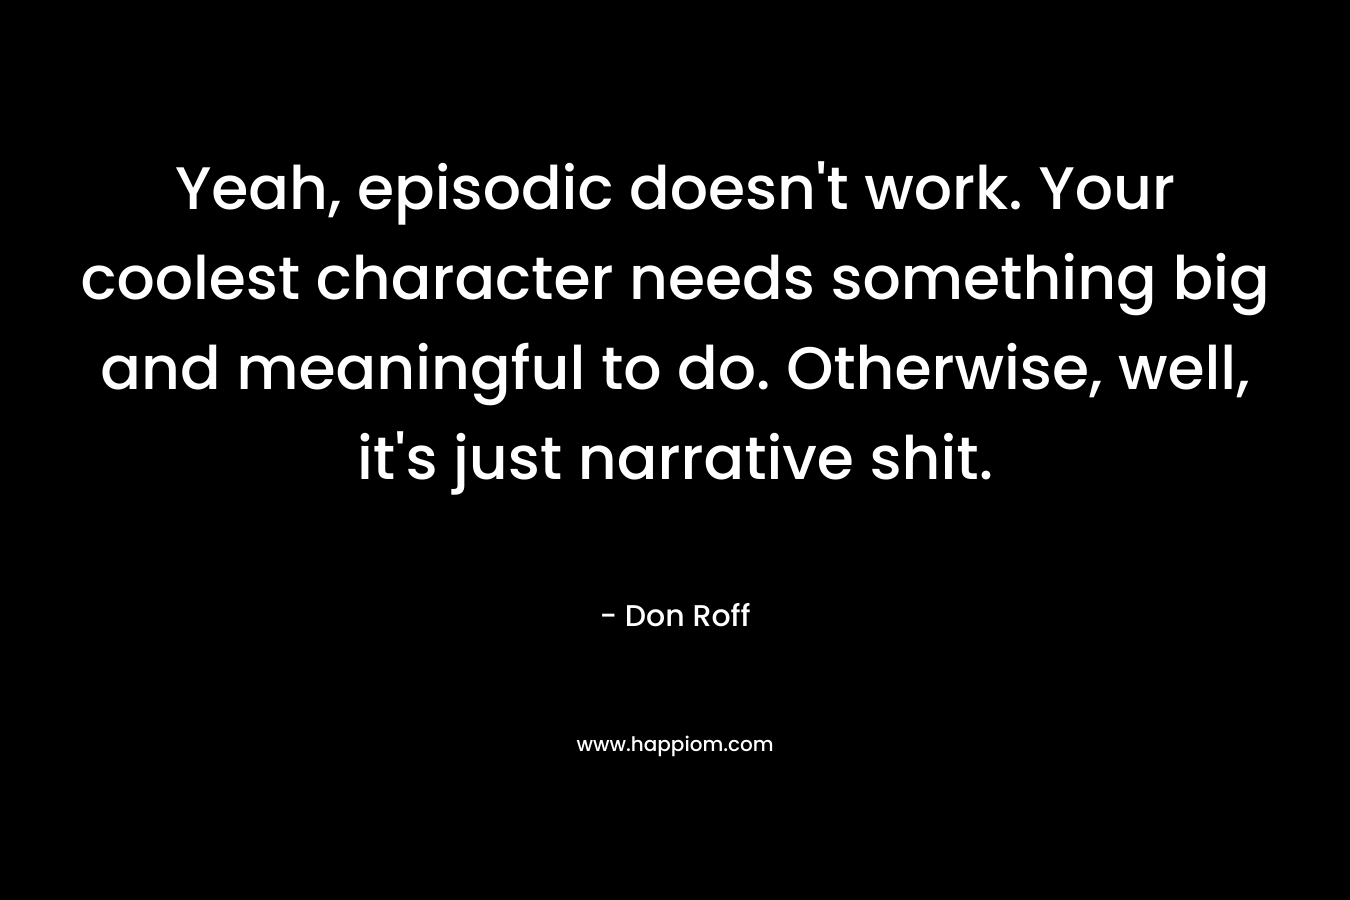 Yeah, episodic doesn’t work. Your coolest character needs something big and meaningful to do. Otherwise, well, it’s just narrative shit. – Don Roff